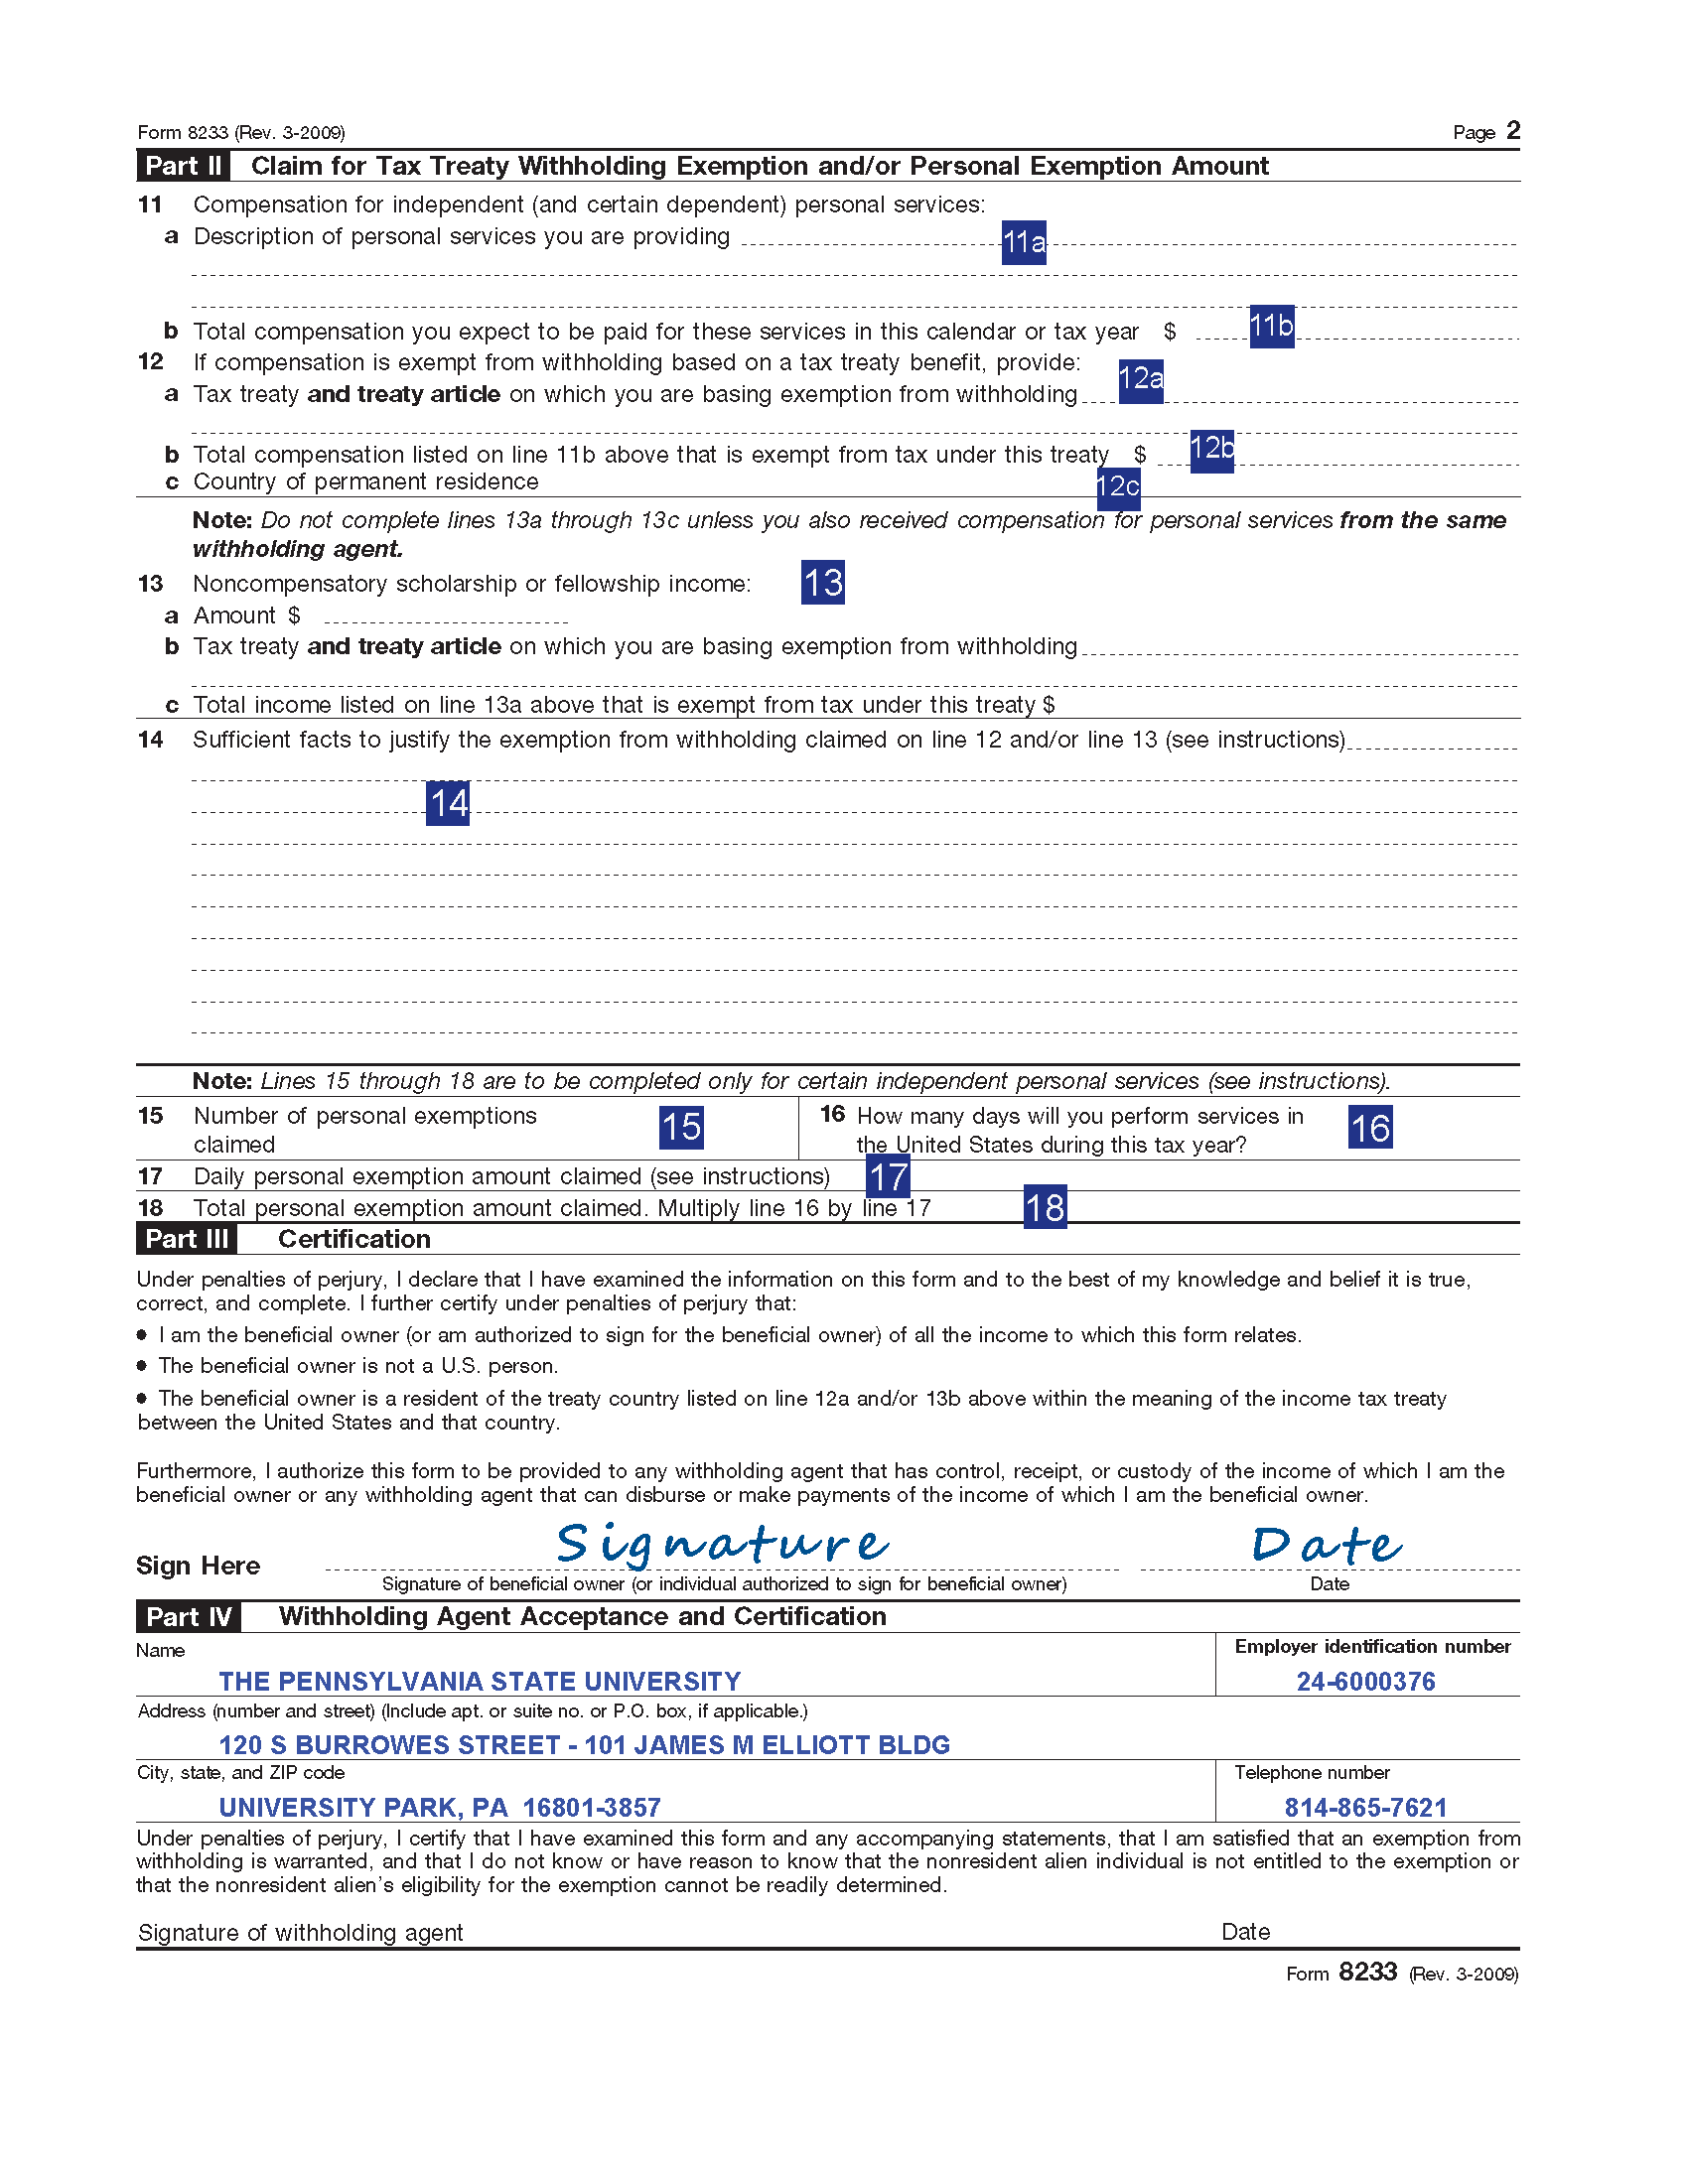 image-of-name-of-exemption-from-withholding-irs-8233-form-exhibit-page-2